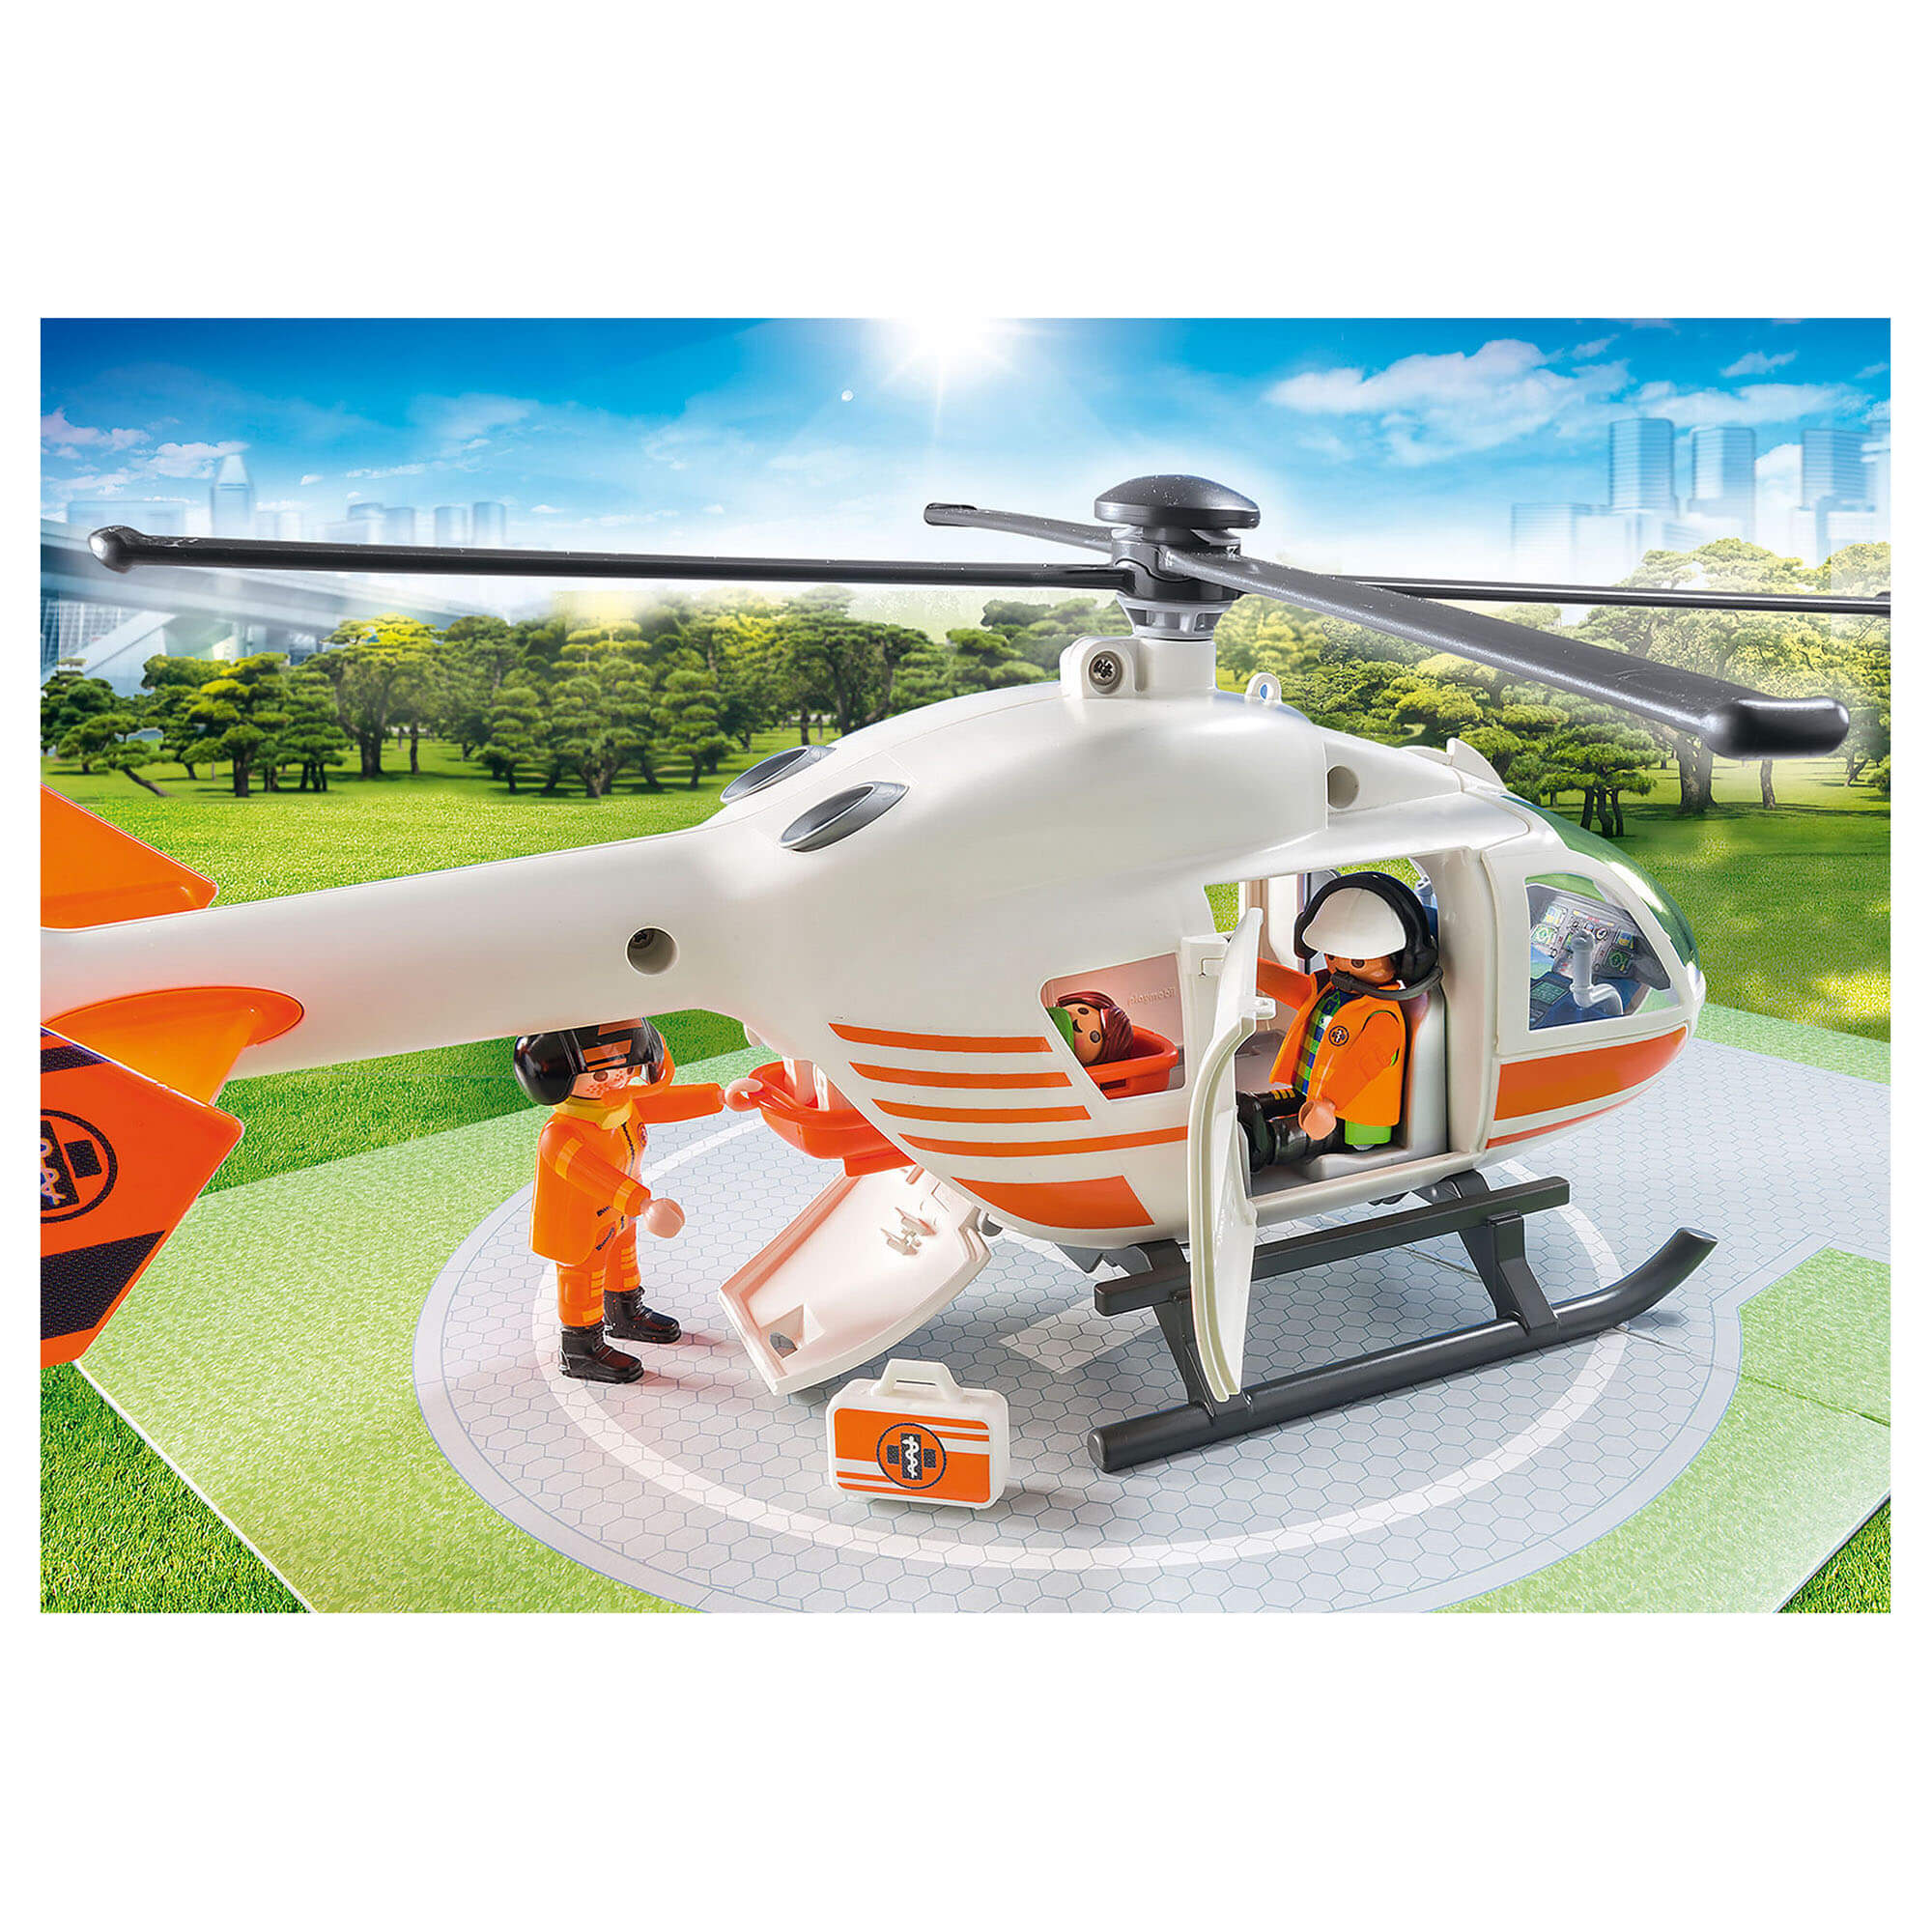 PLAYMOBIL City Action Helicopter Playset 